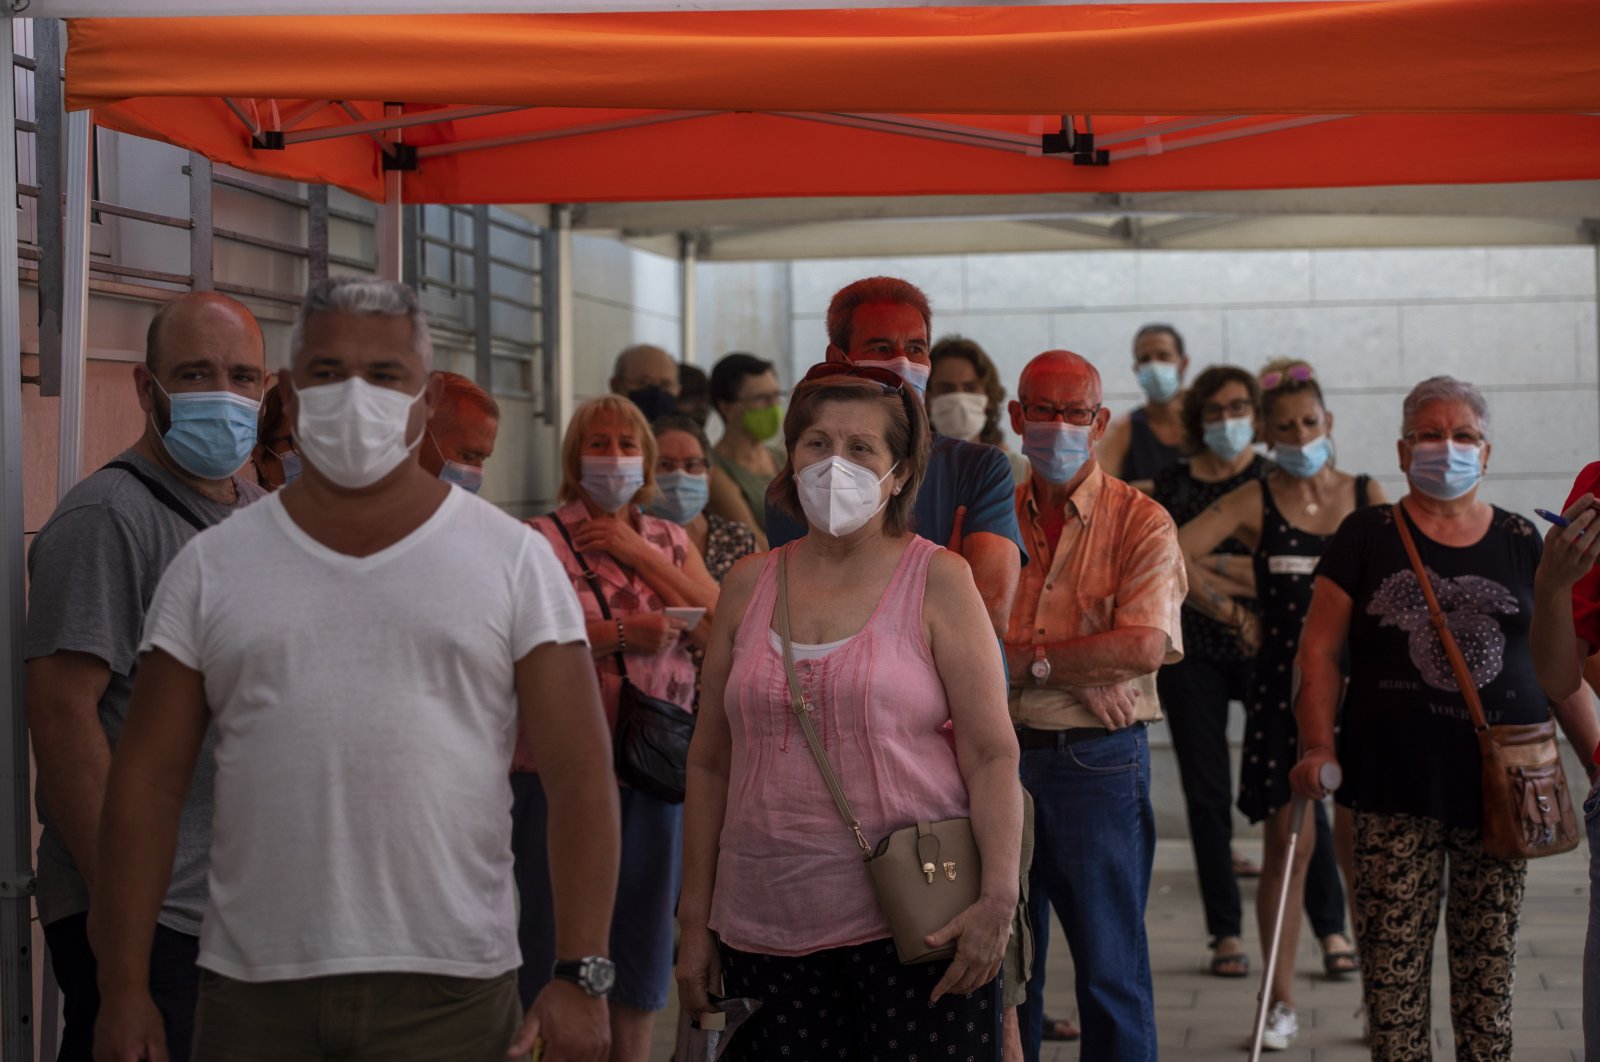 People wearing face masks queue up to be tested for COVID-19, outside a local clinic in Santa Coloma de Gramanet in Barcelona, Spain, Aug. 11, 2020. (AP Photo)